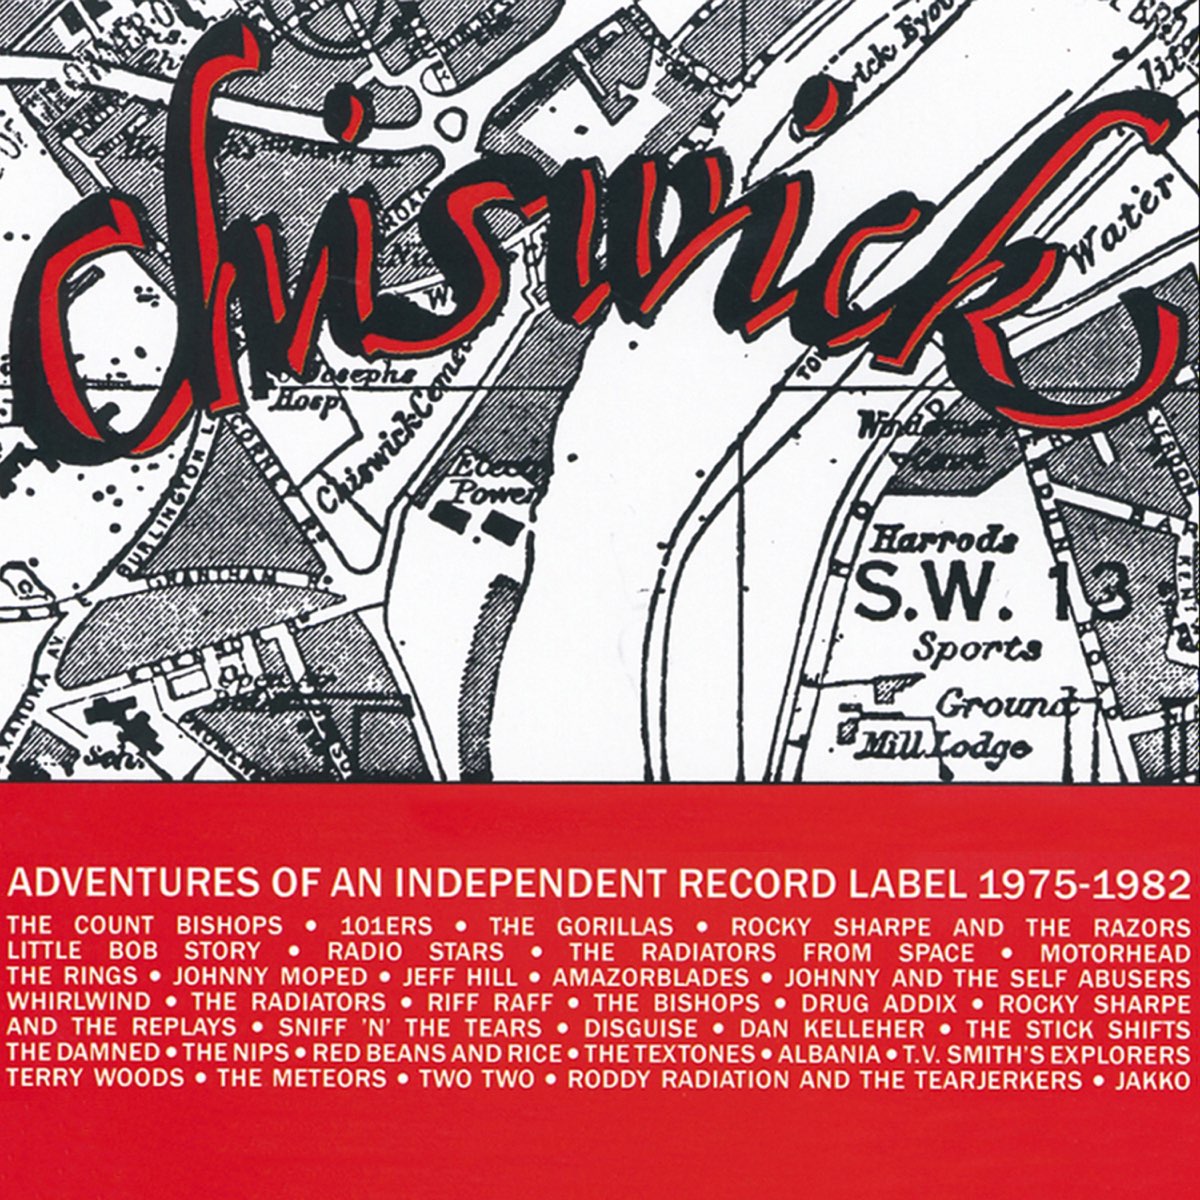 The Chiswick Story by Various Artists on Apple Music